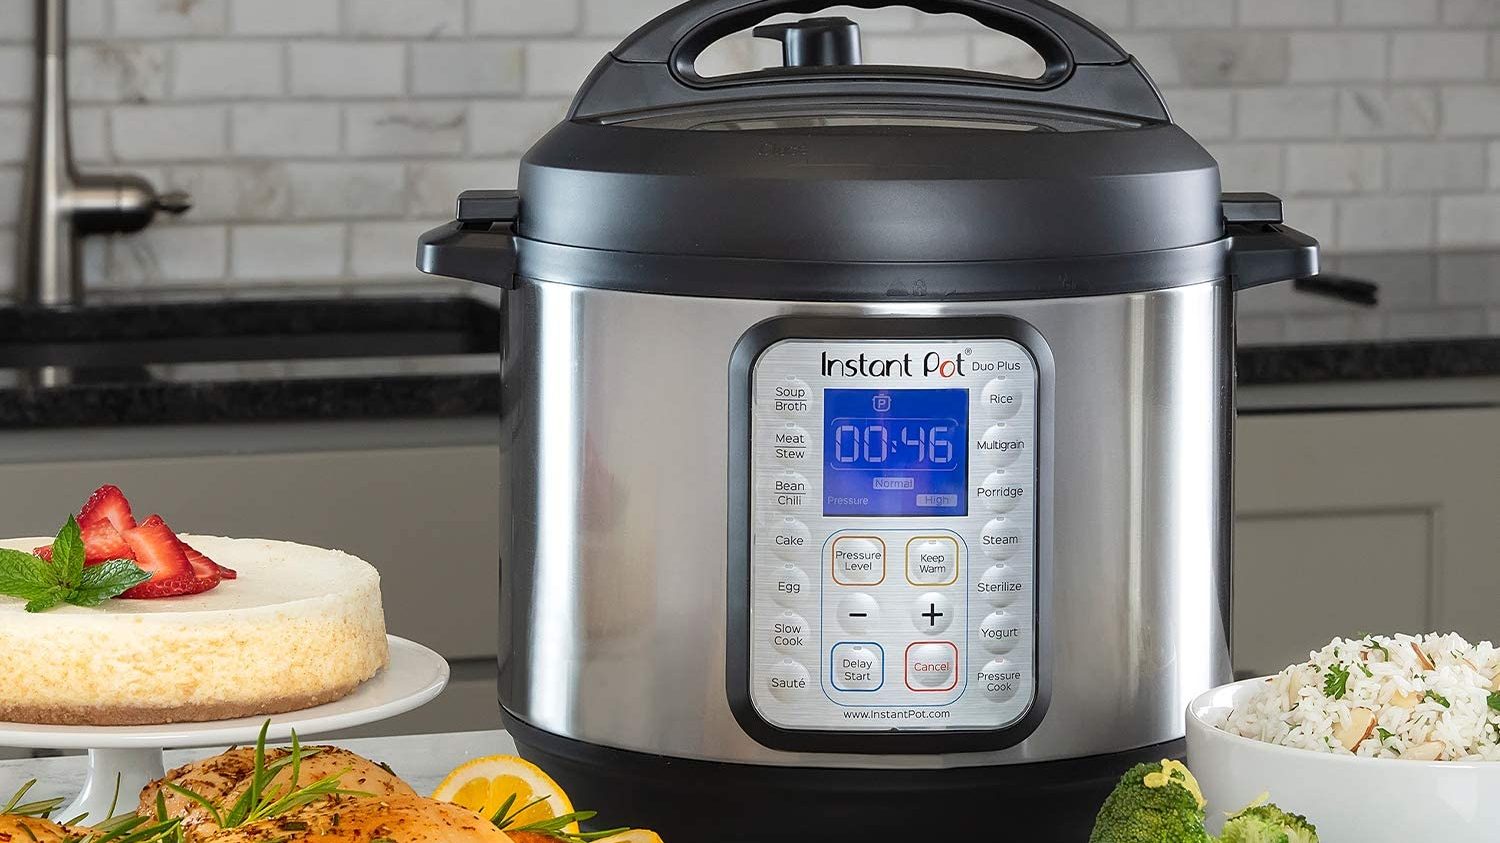 Amazon’s early Black Friday sale slashes the hottest new Instant Pot to